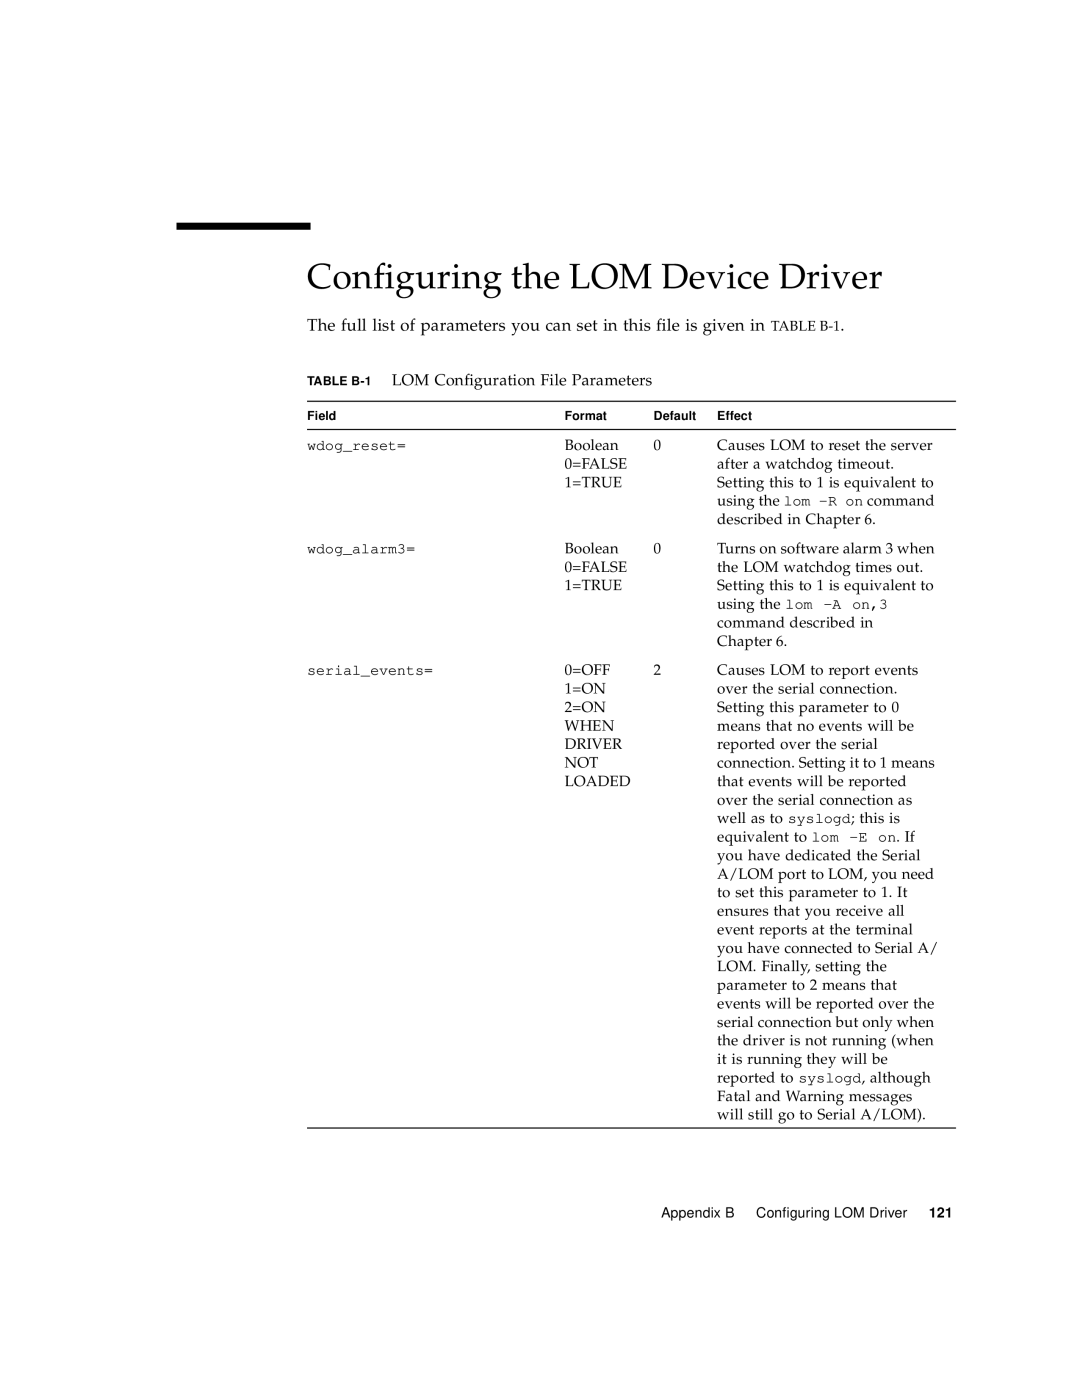 Sun Microsystems Sun Fire V100 manual Configuring the LOM Device Driver, TABLE B-1 LOM Configuration File Parameters 